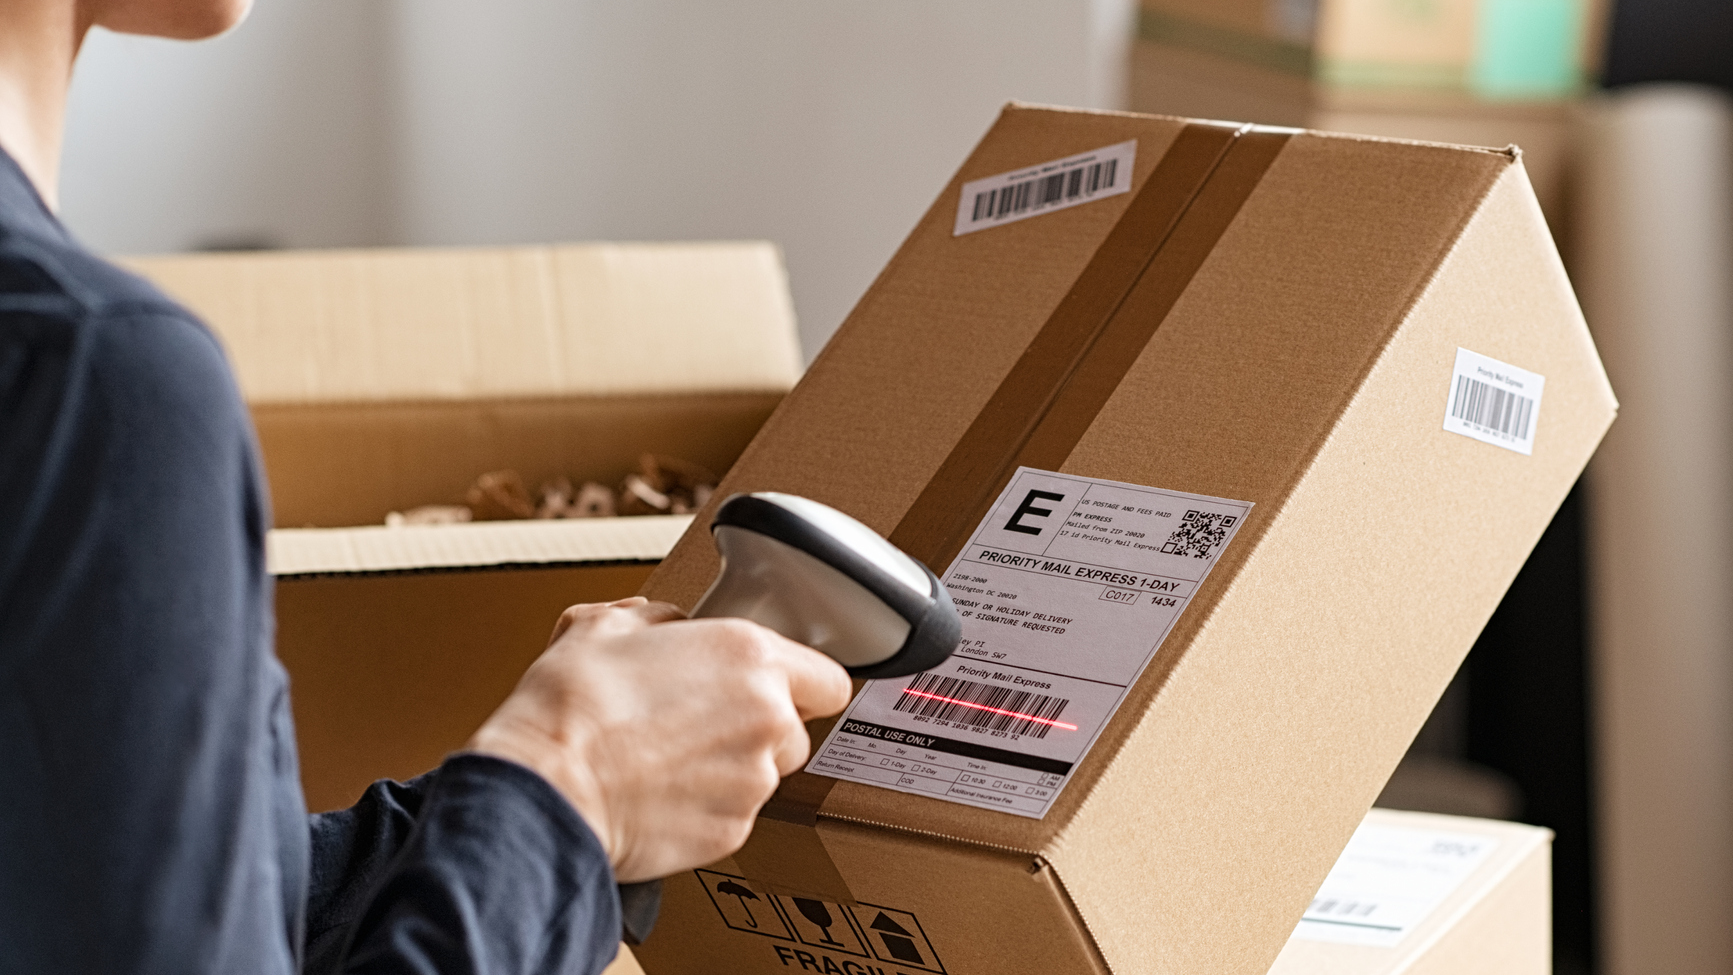 Scanning barcode on a delivery parcel